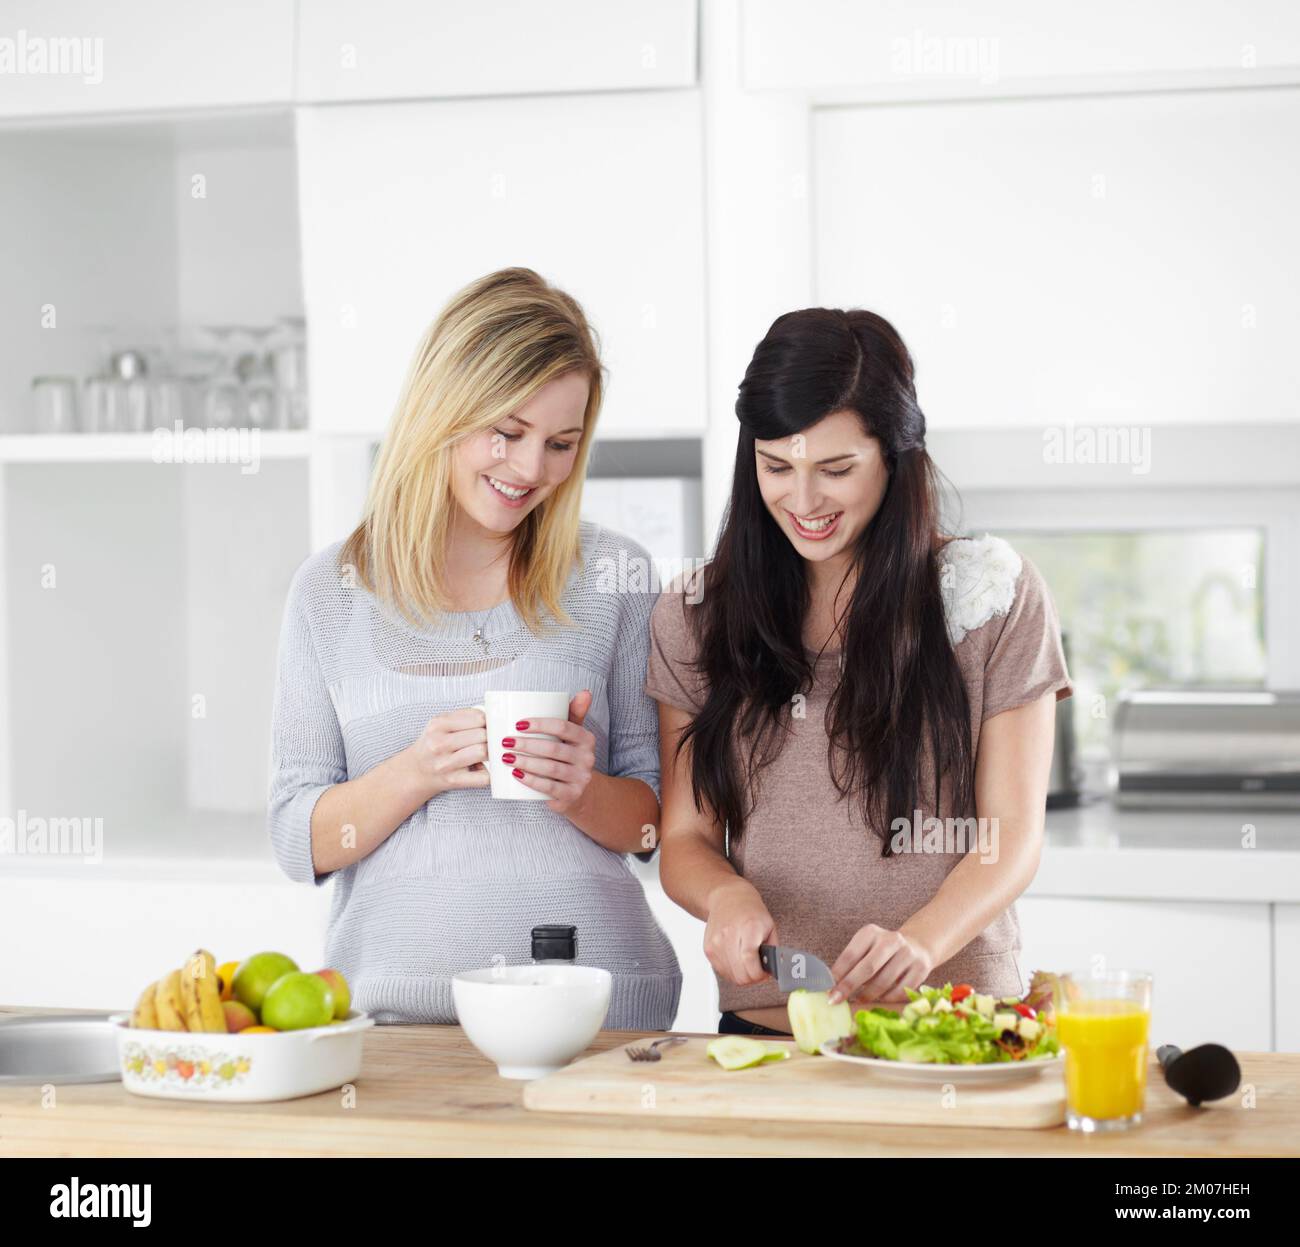 Serving up a healthy meal. Two young women making a salad in the kitchen at home. Stock Photo